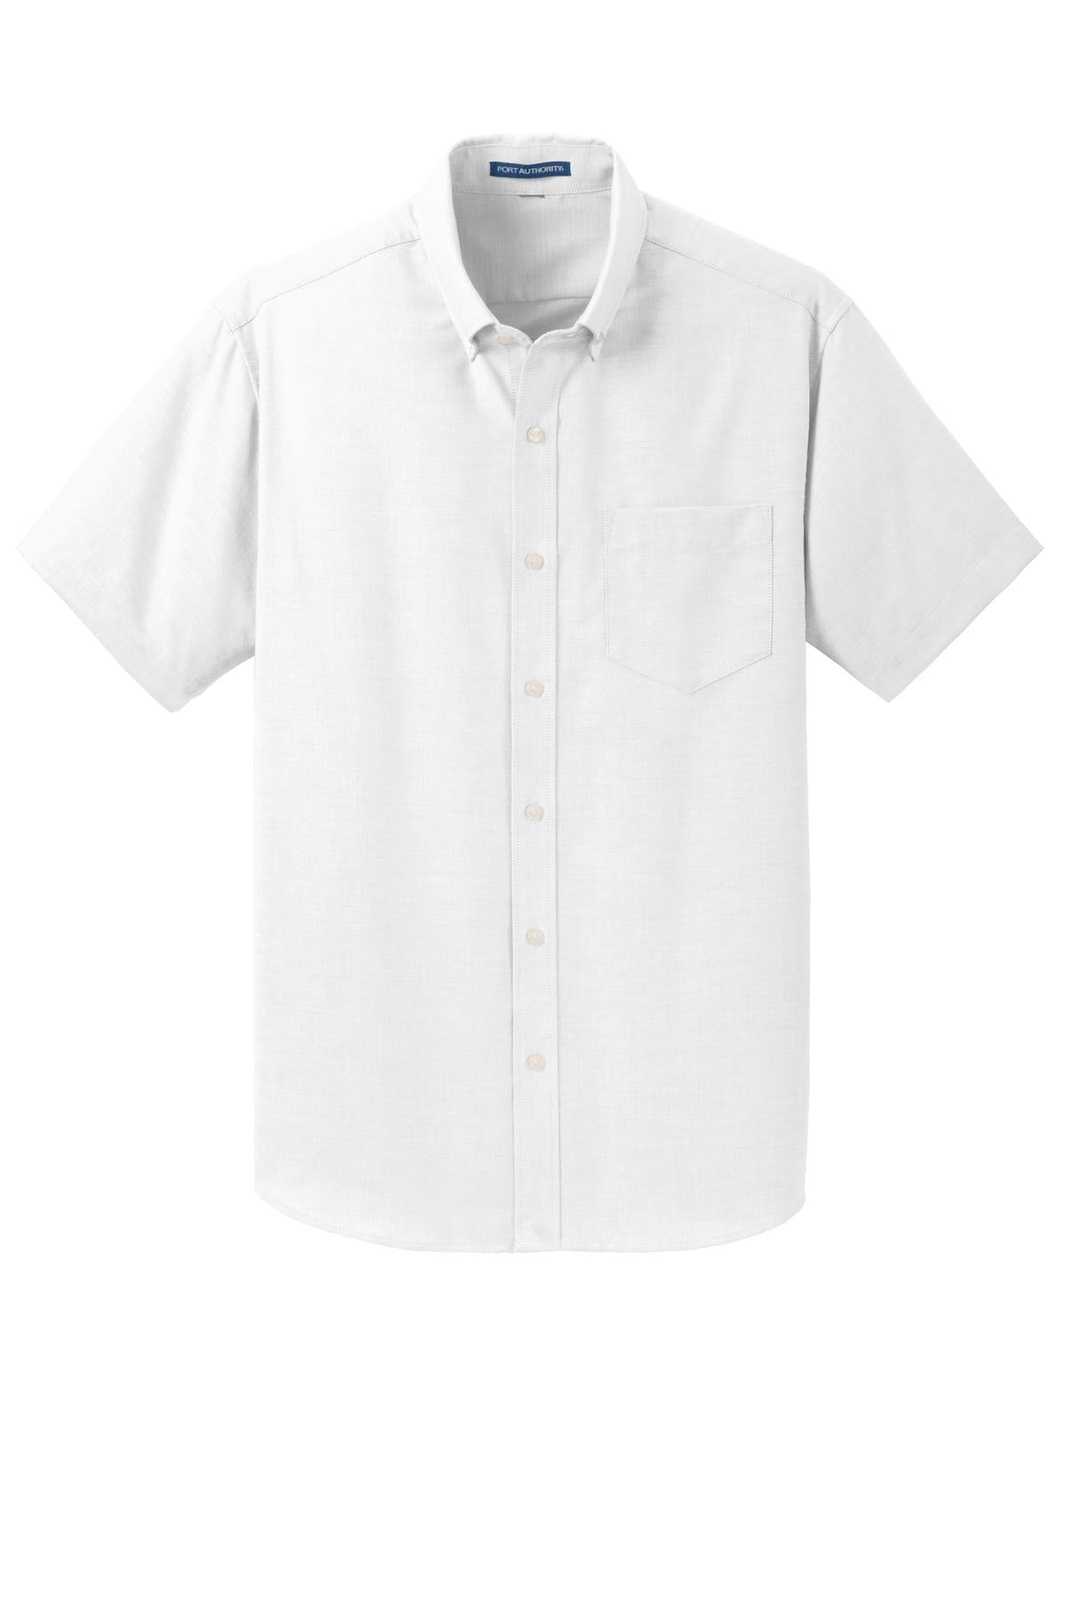 Port Authority S659 Short Sleeve Superpro Oxford Shirt - White - HIT a Double - 5